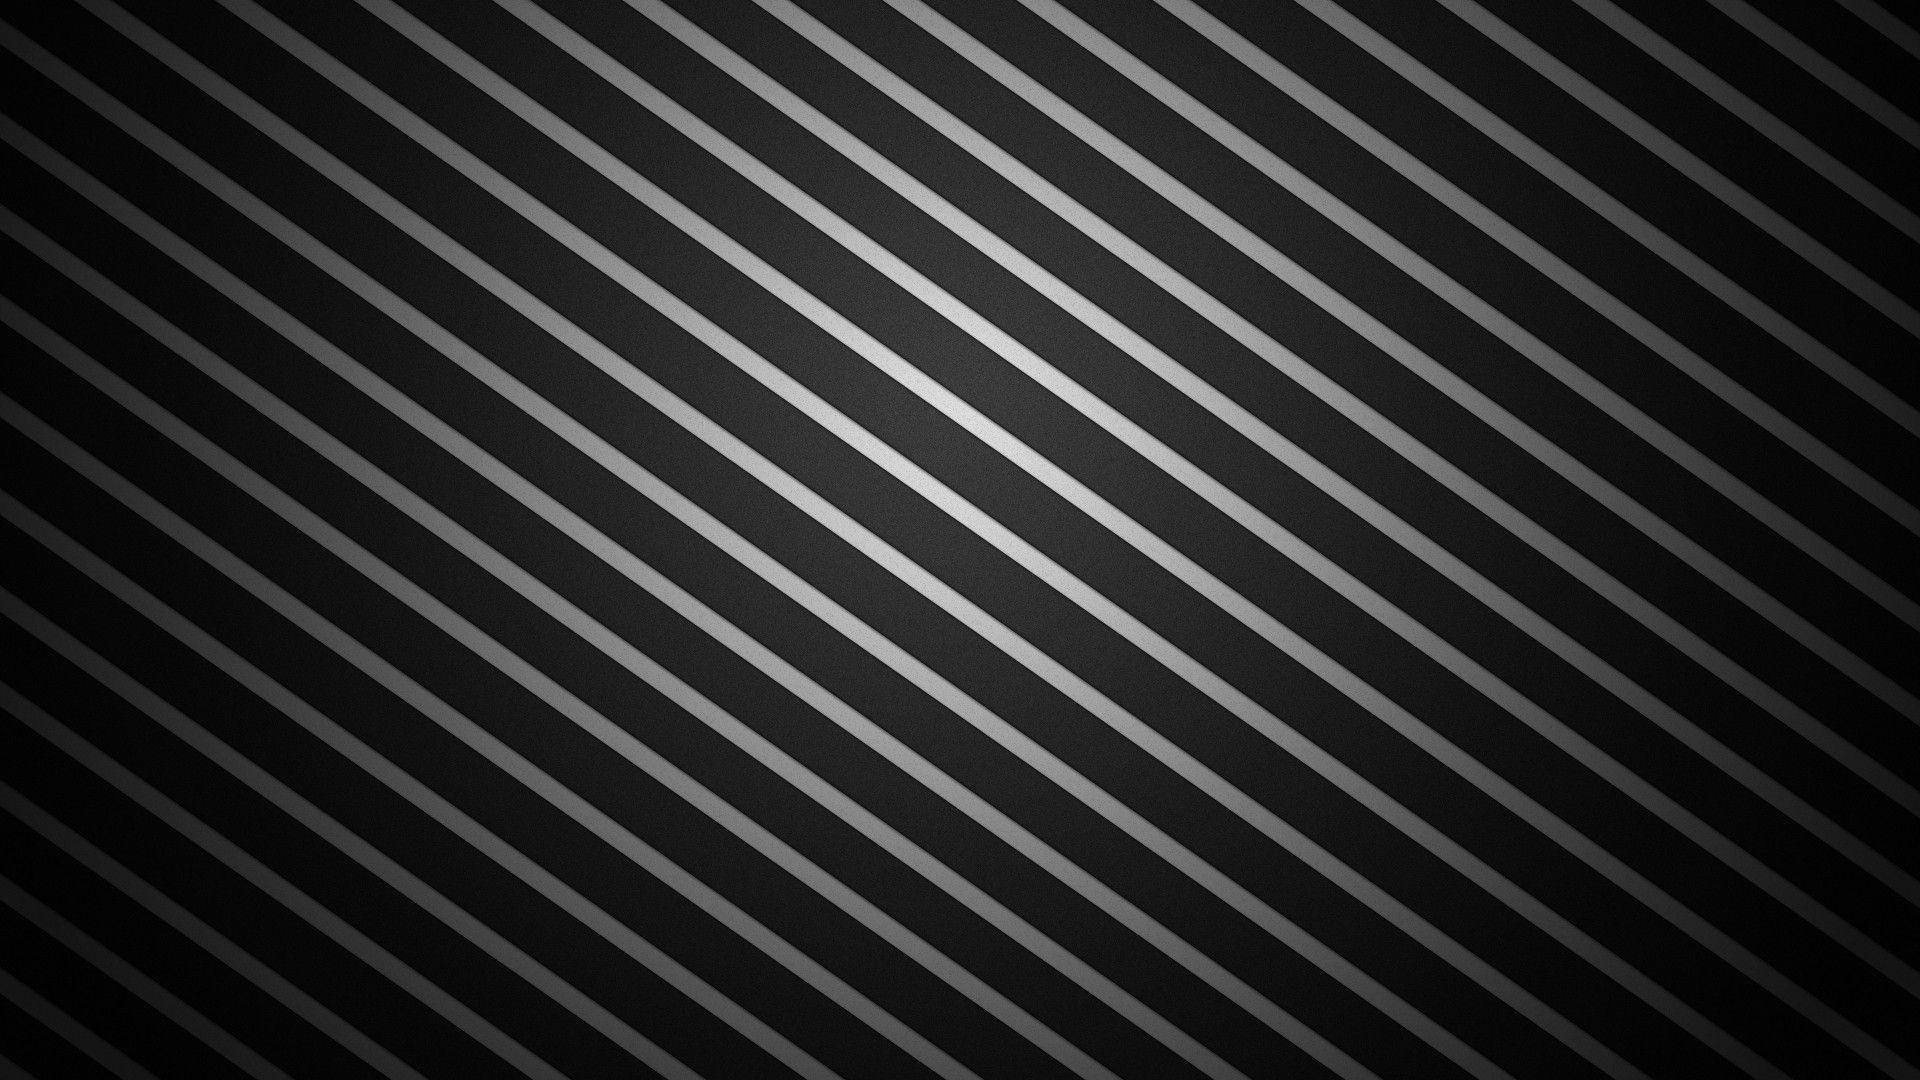 Download Abstract Black Image Wallpaper 1920x1080. Full HD